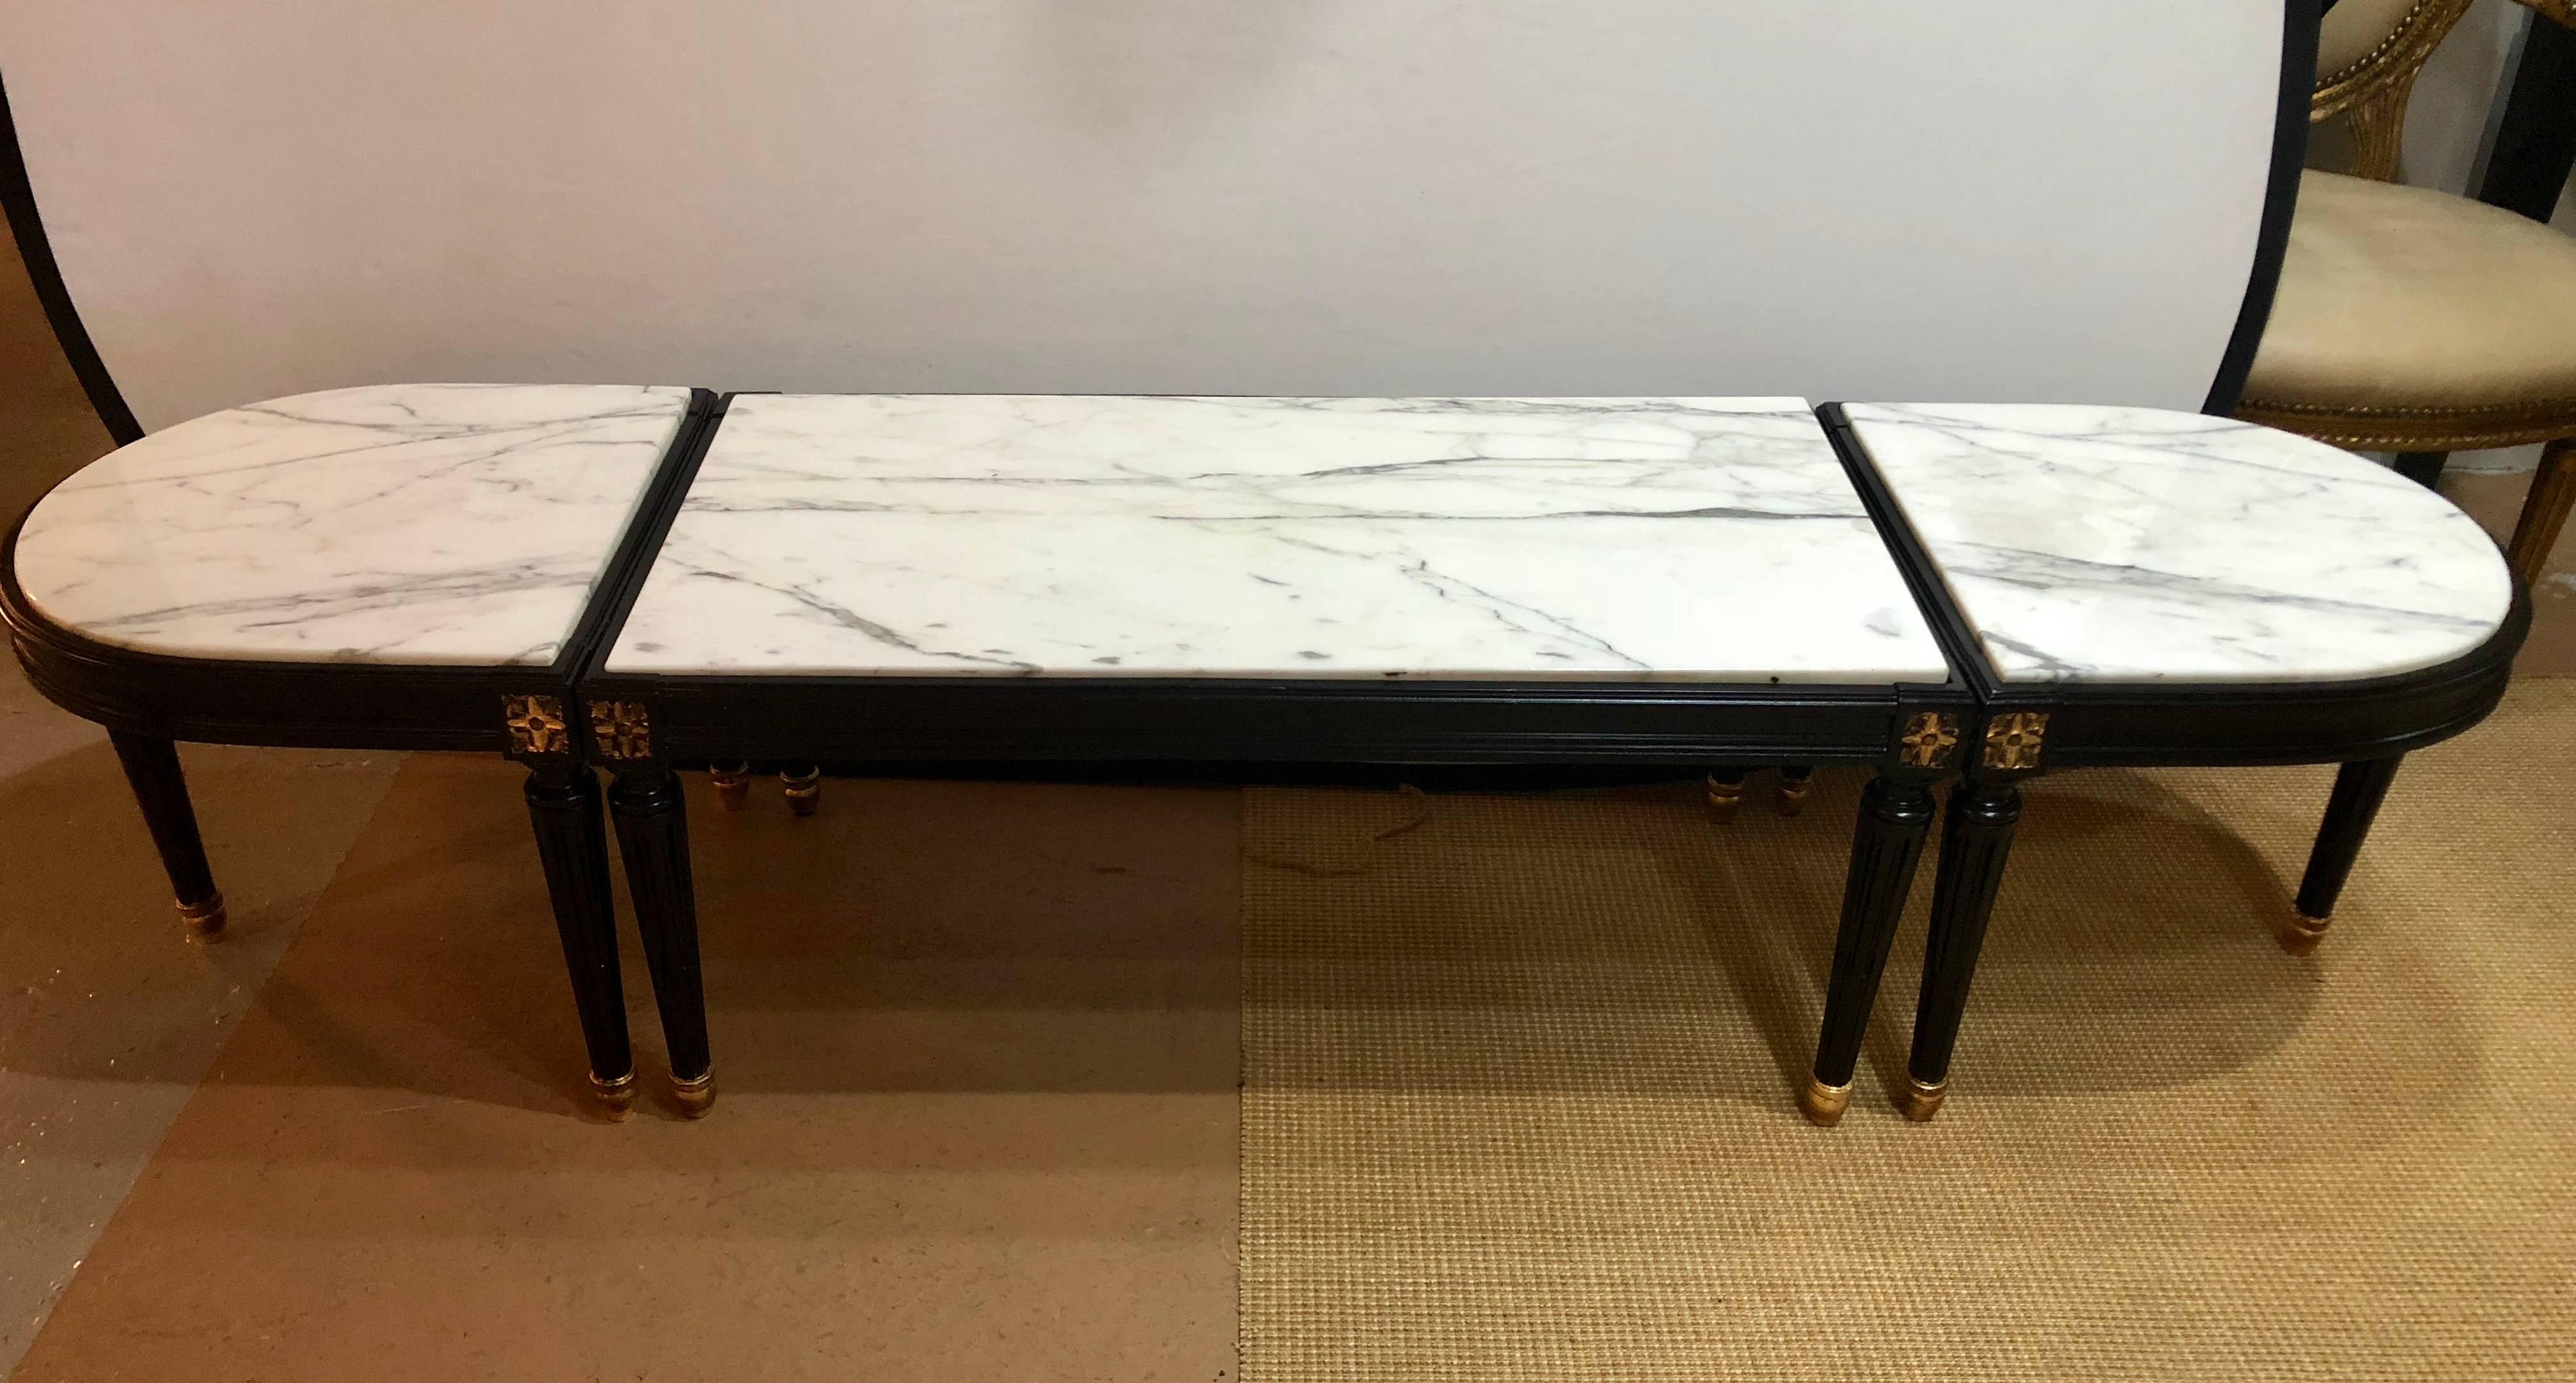 A Louis XVI style inset marble-top three-piece coffee table in the manner of Maison Jansen. This ebony and parcel-gilt decorated coffee table can be sitting placed together or used as a center coffee table and two end tables or stands. Each white